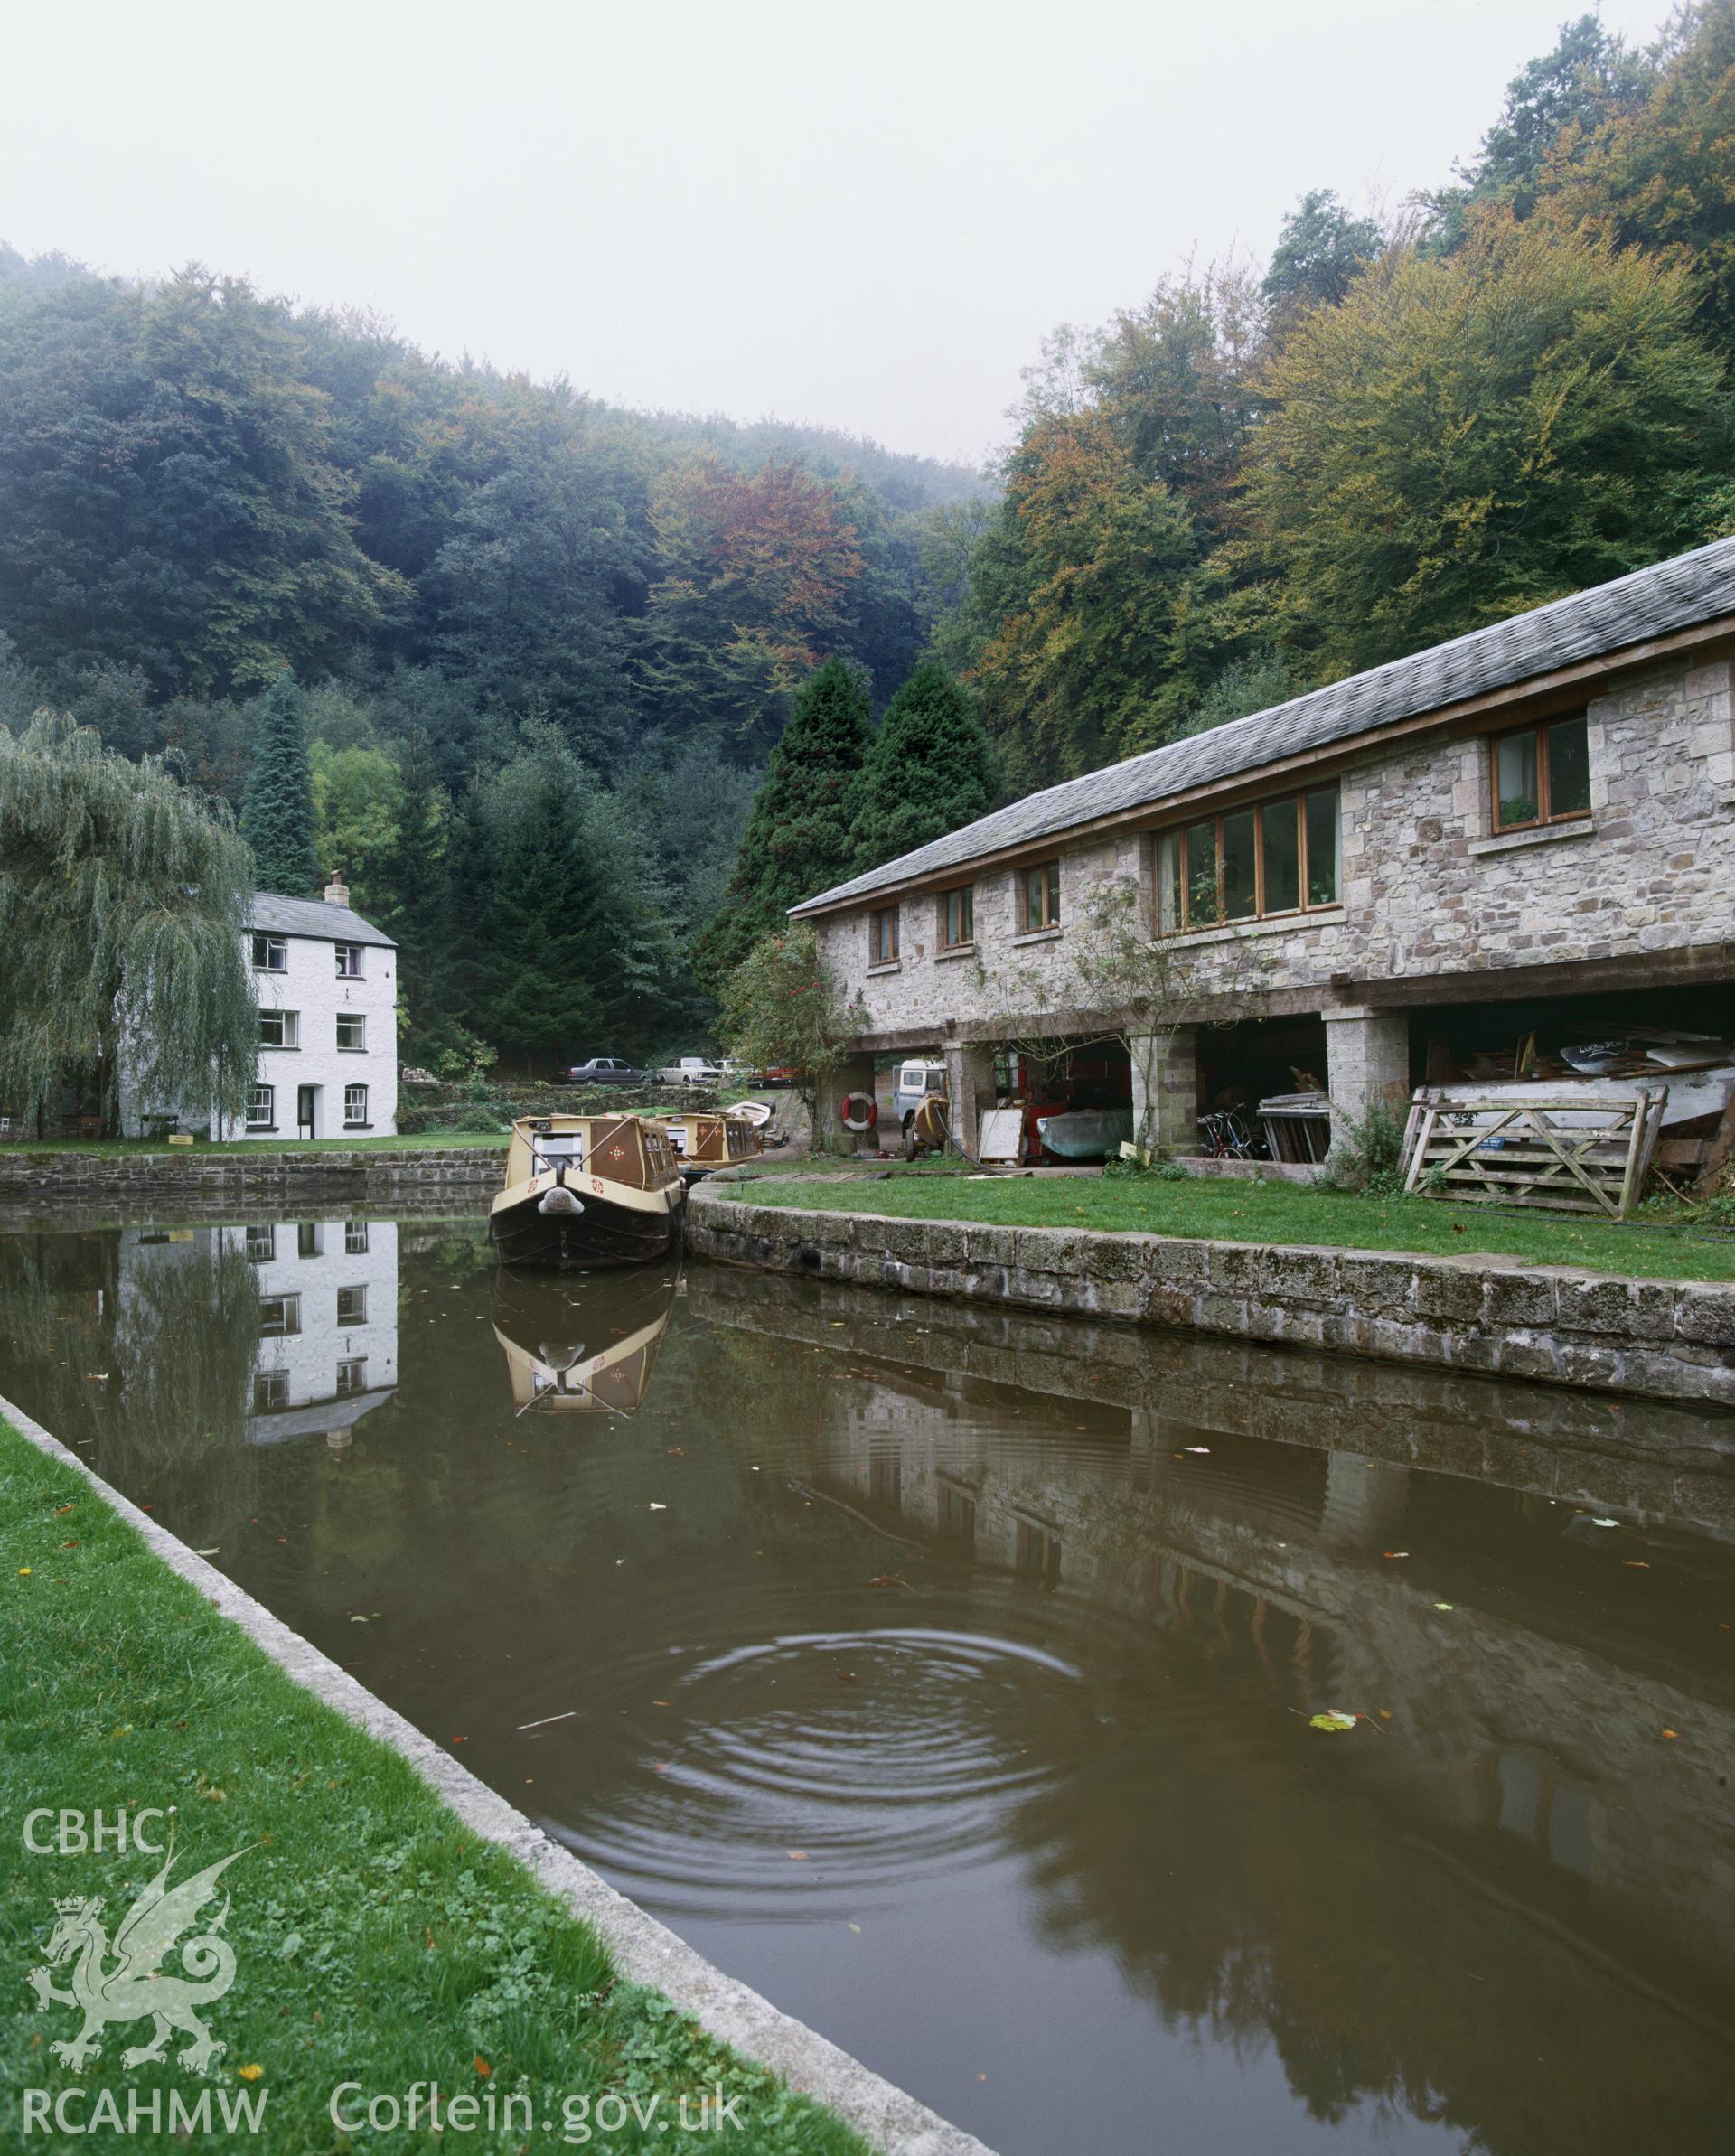 Colour transparency showing a view of the warehouse at Llanfoist, on the Brecon Monmouth Canal, produced by Iain Wright c.1990